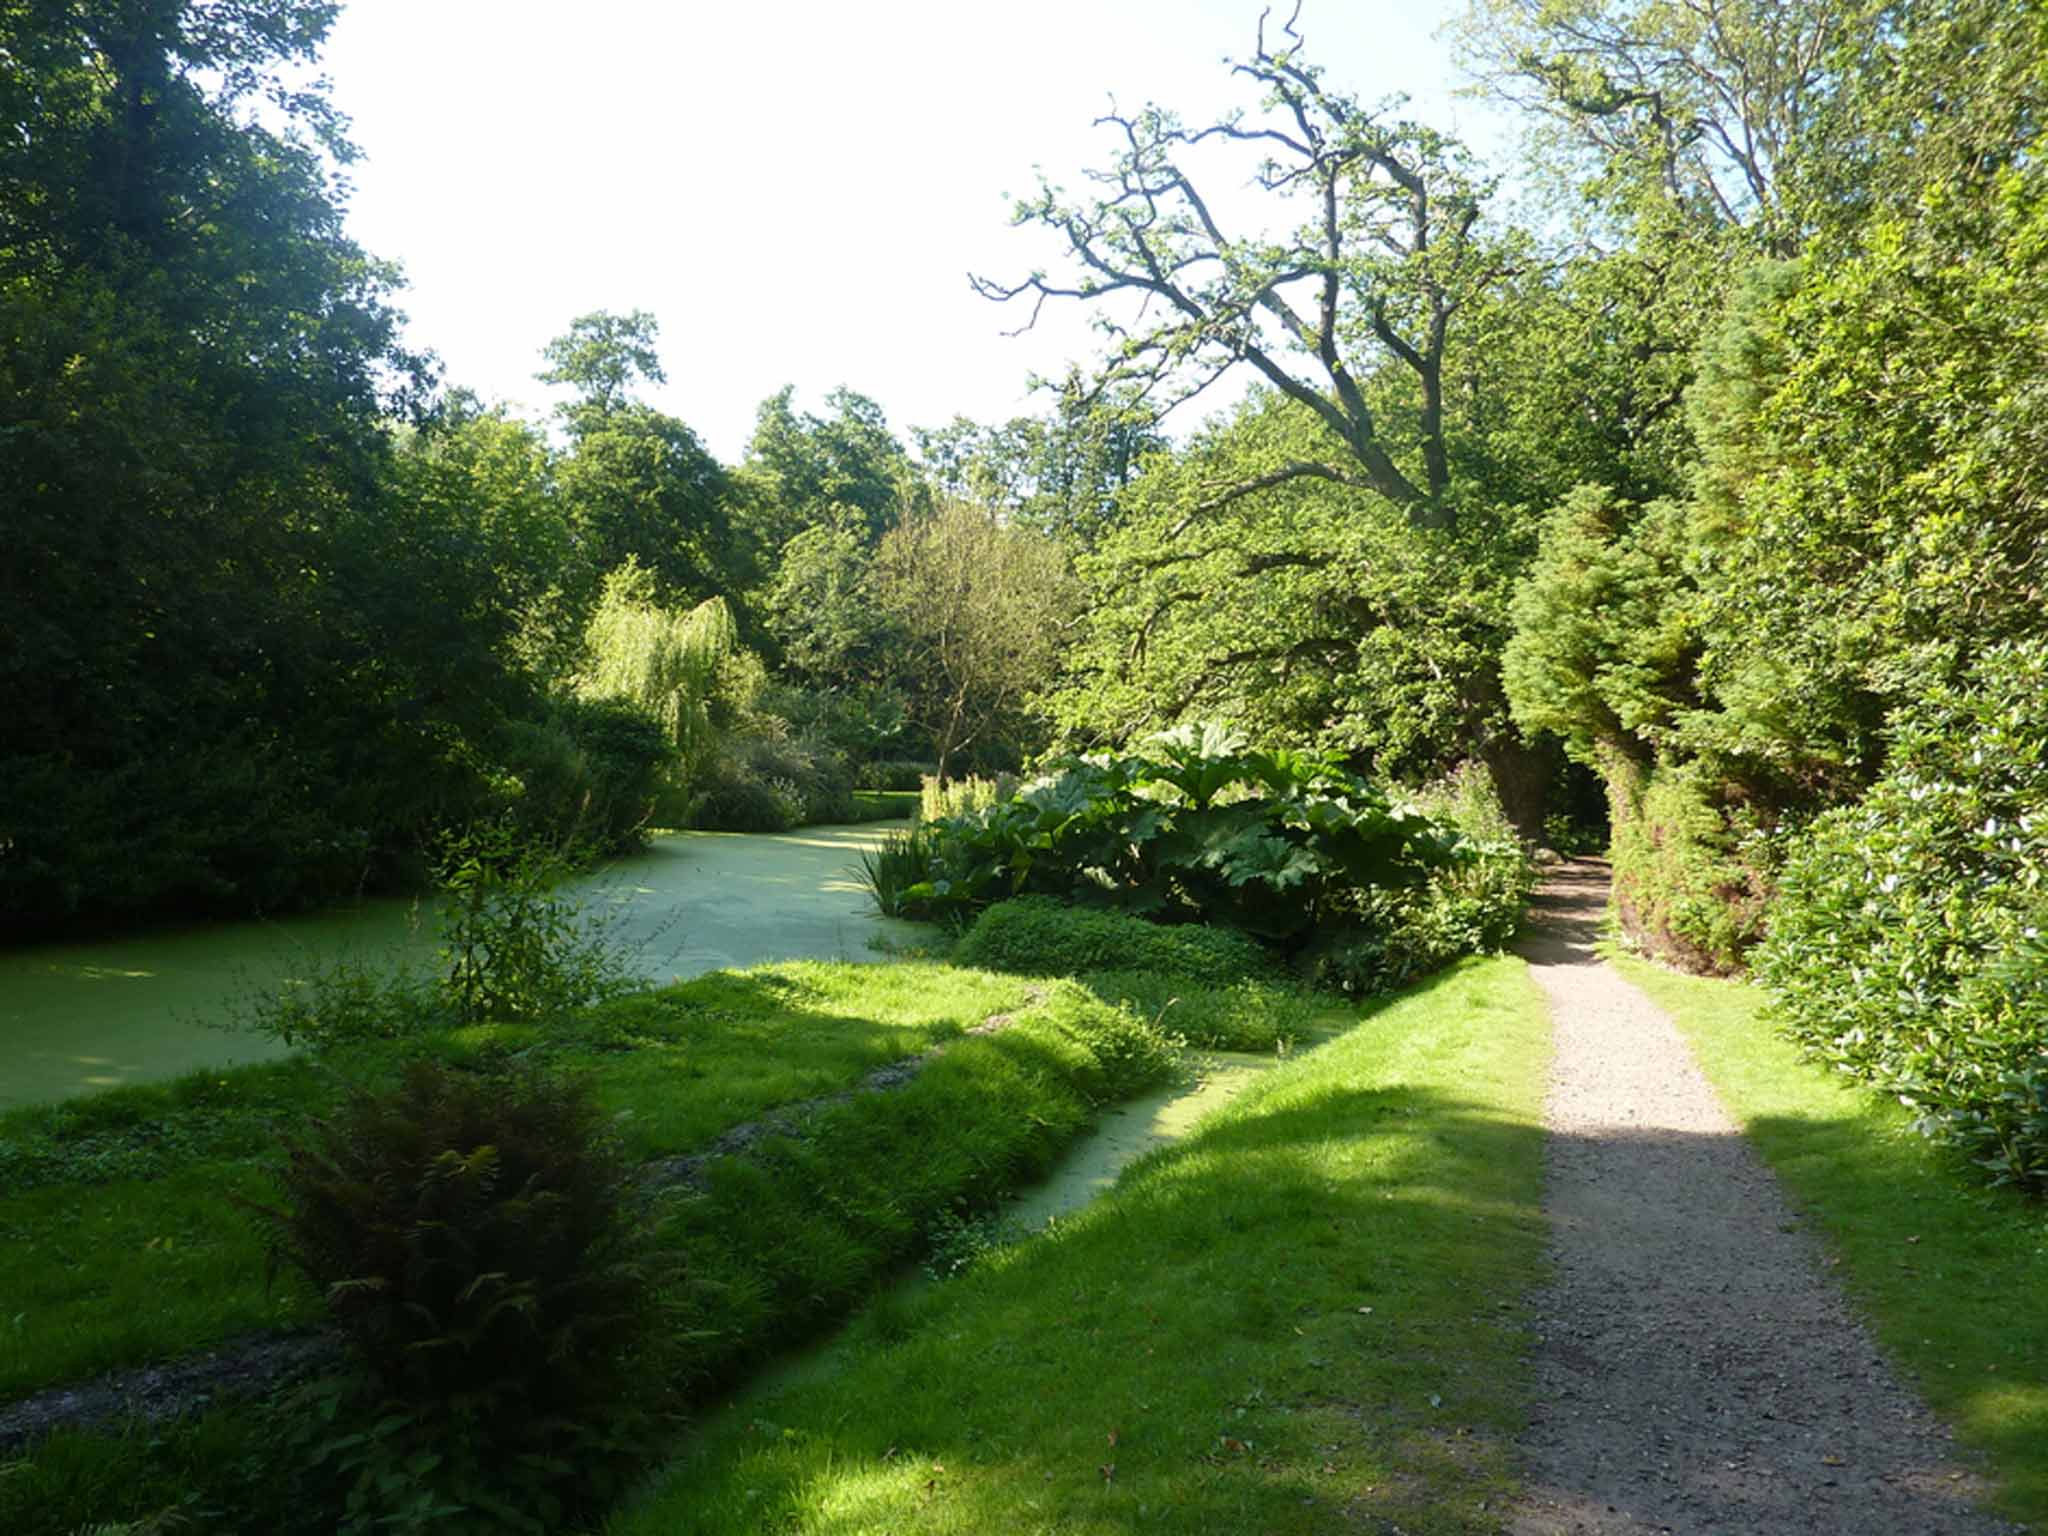 Fairhaven Water Gardens: A beautiful and evocative mix of woodland, dykes and creeks